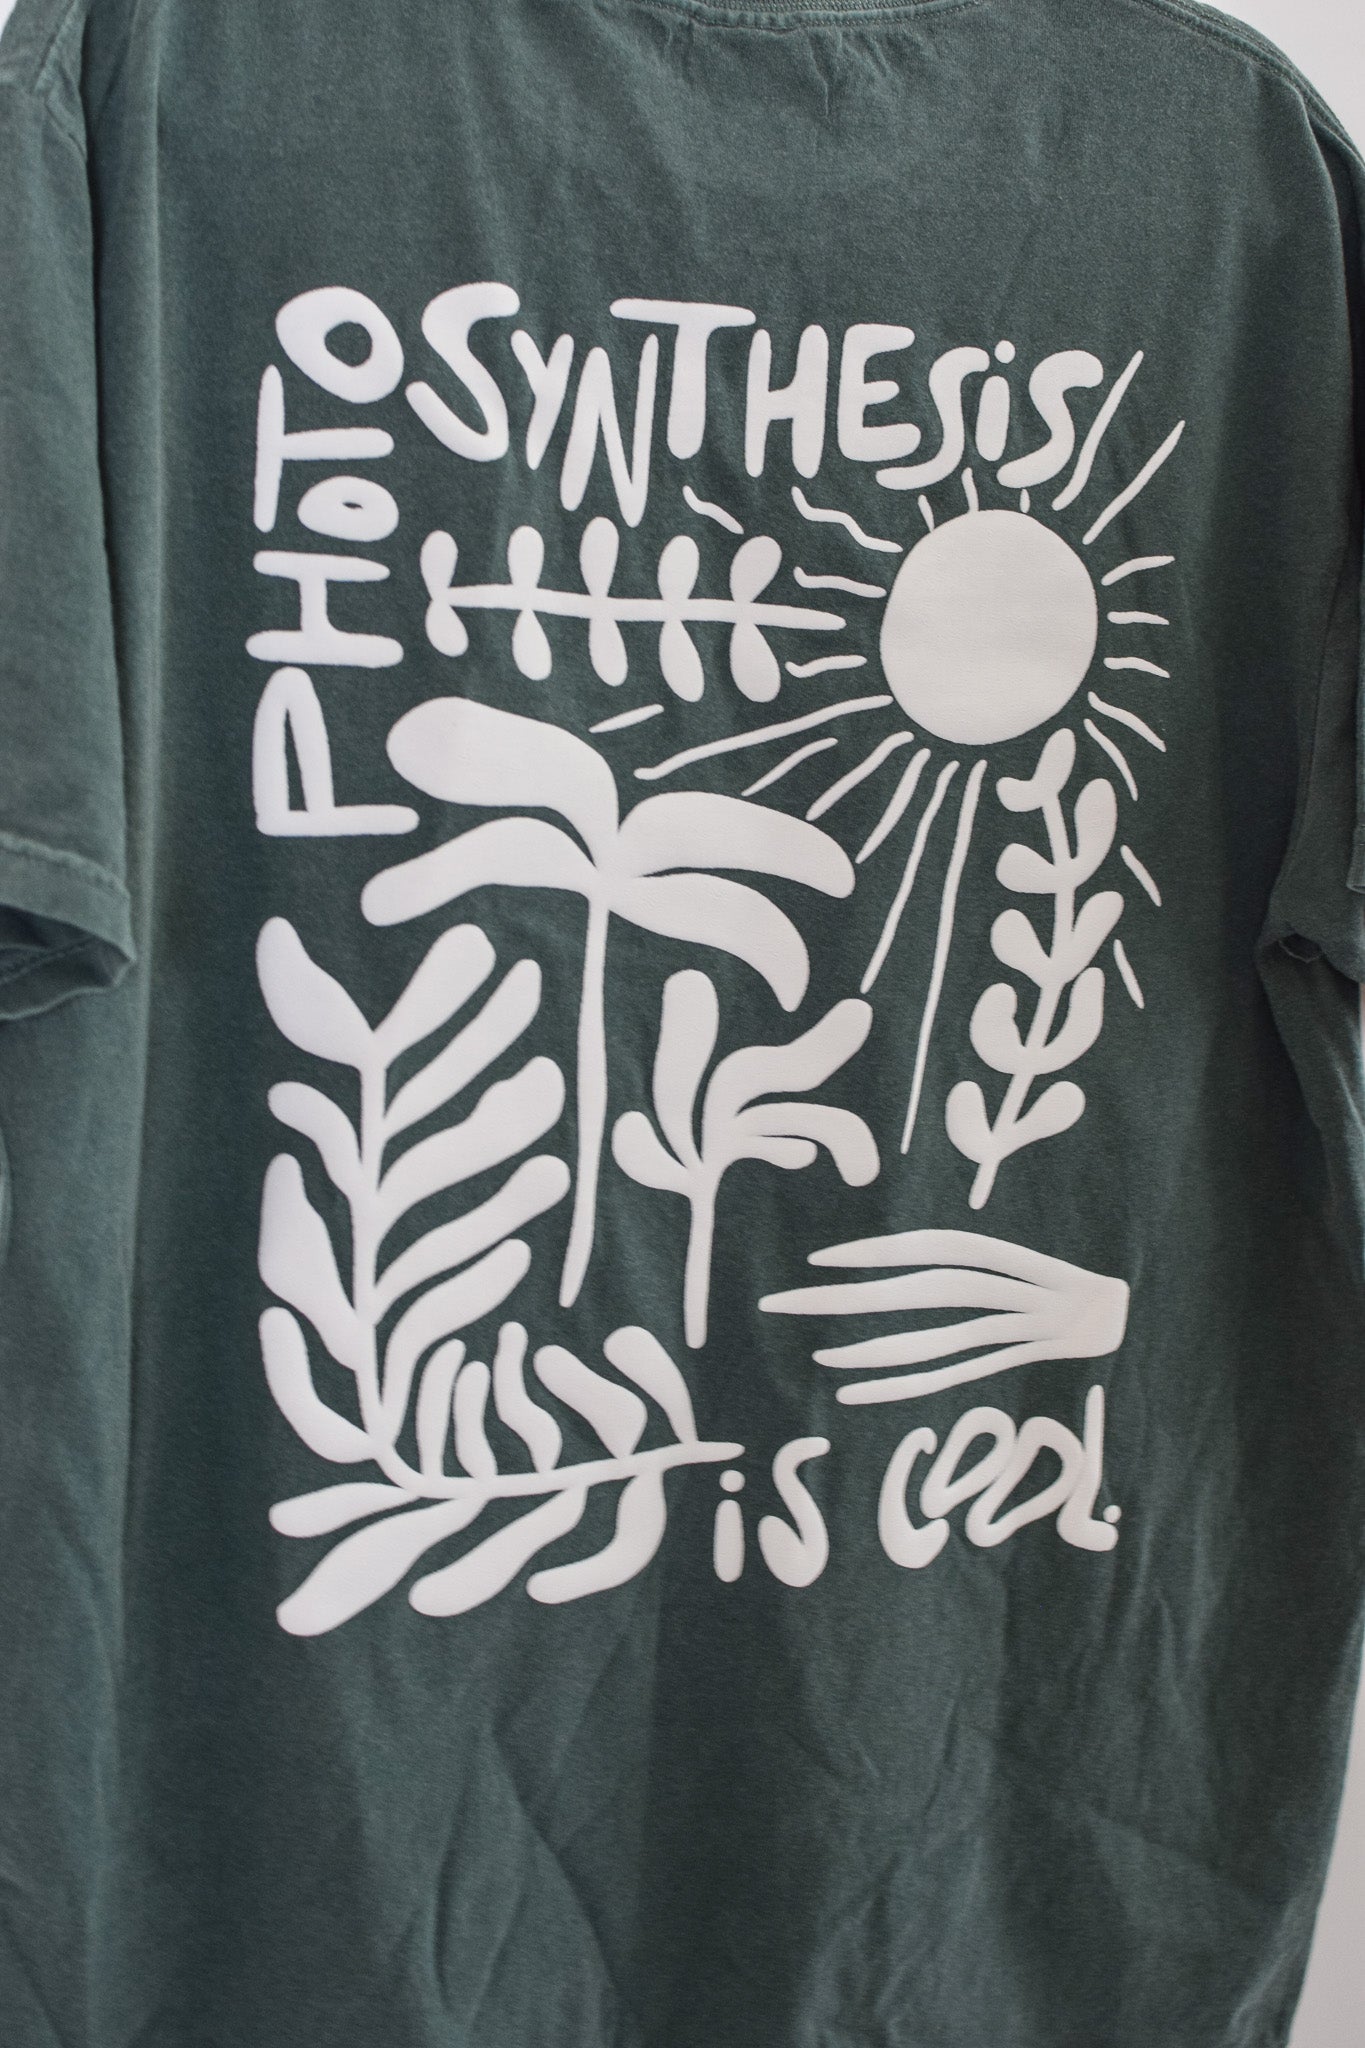 Photosynthesis is Cool Tee